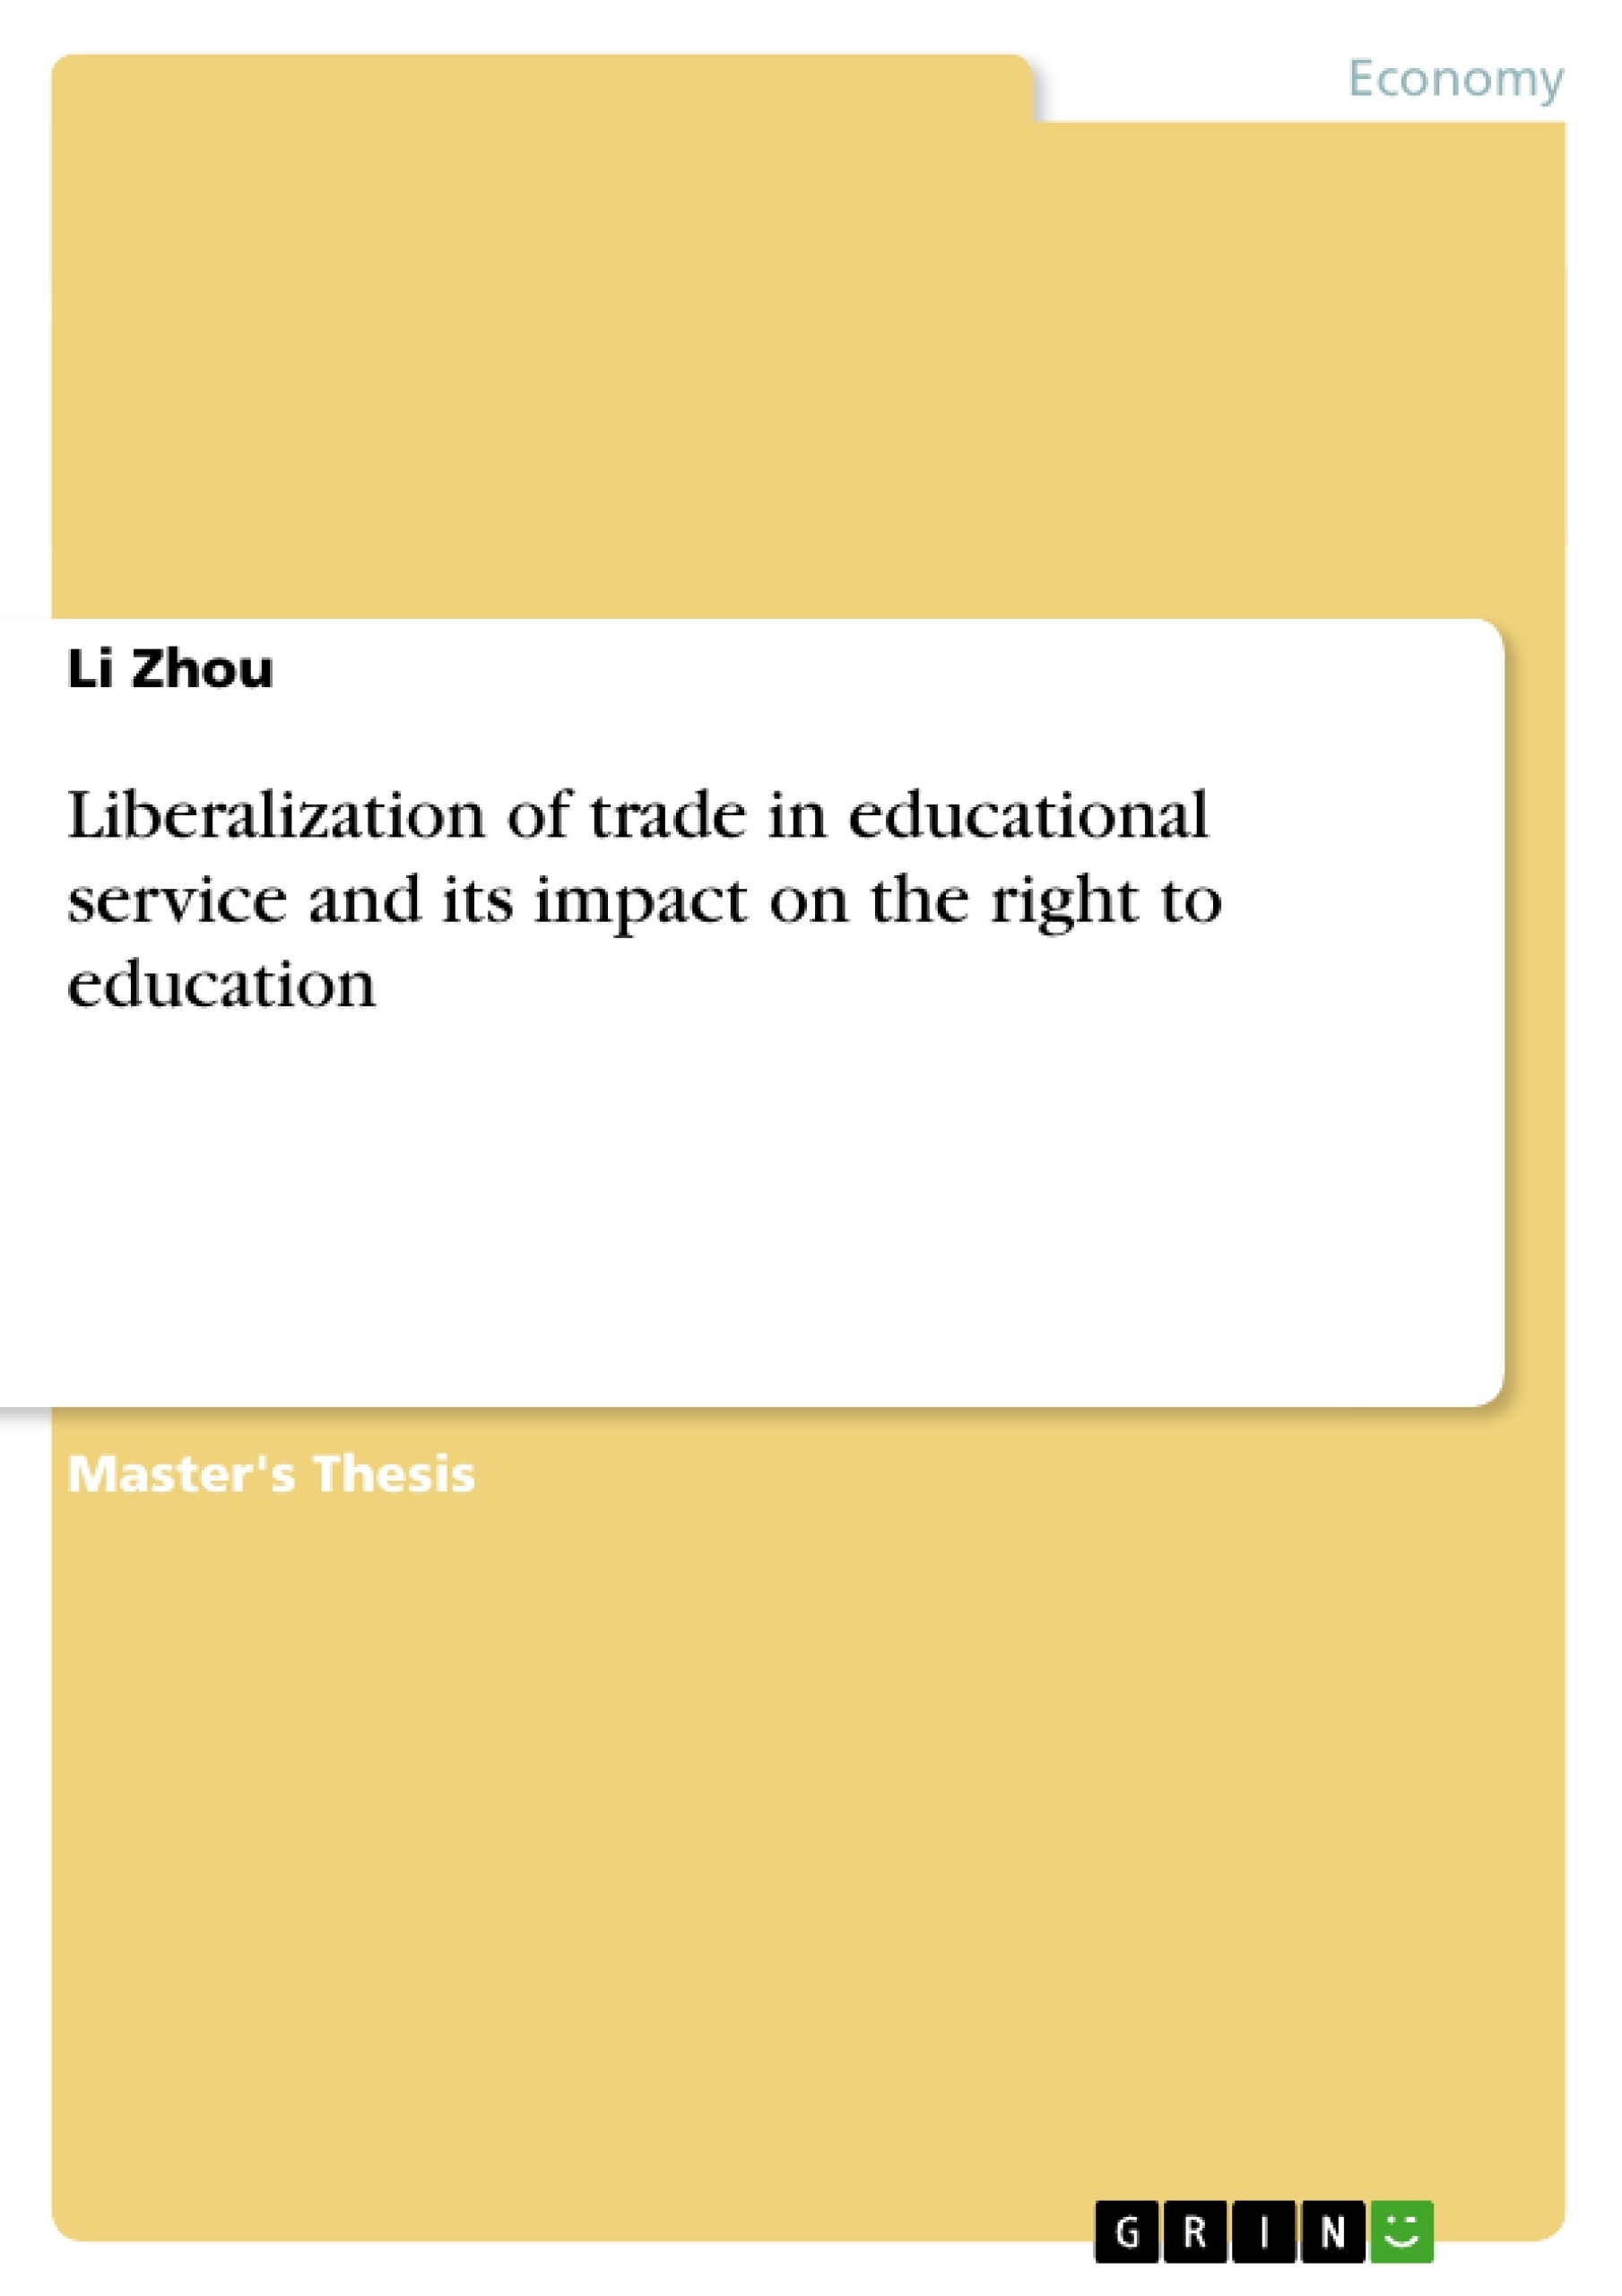 Title: Liberalization of trade in educational service and its impact on the right to education